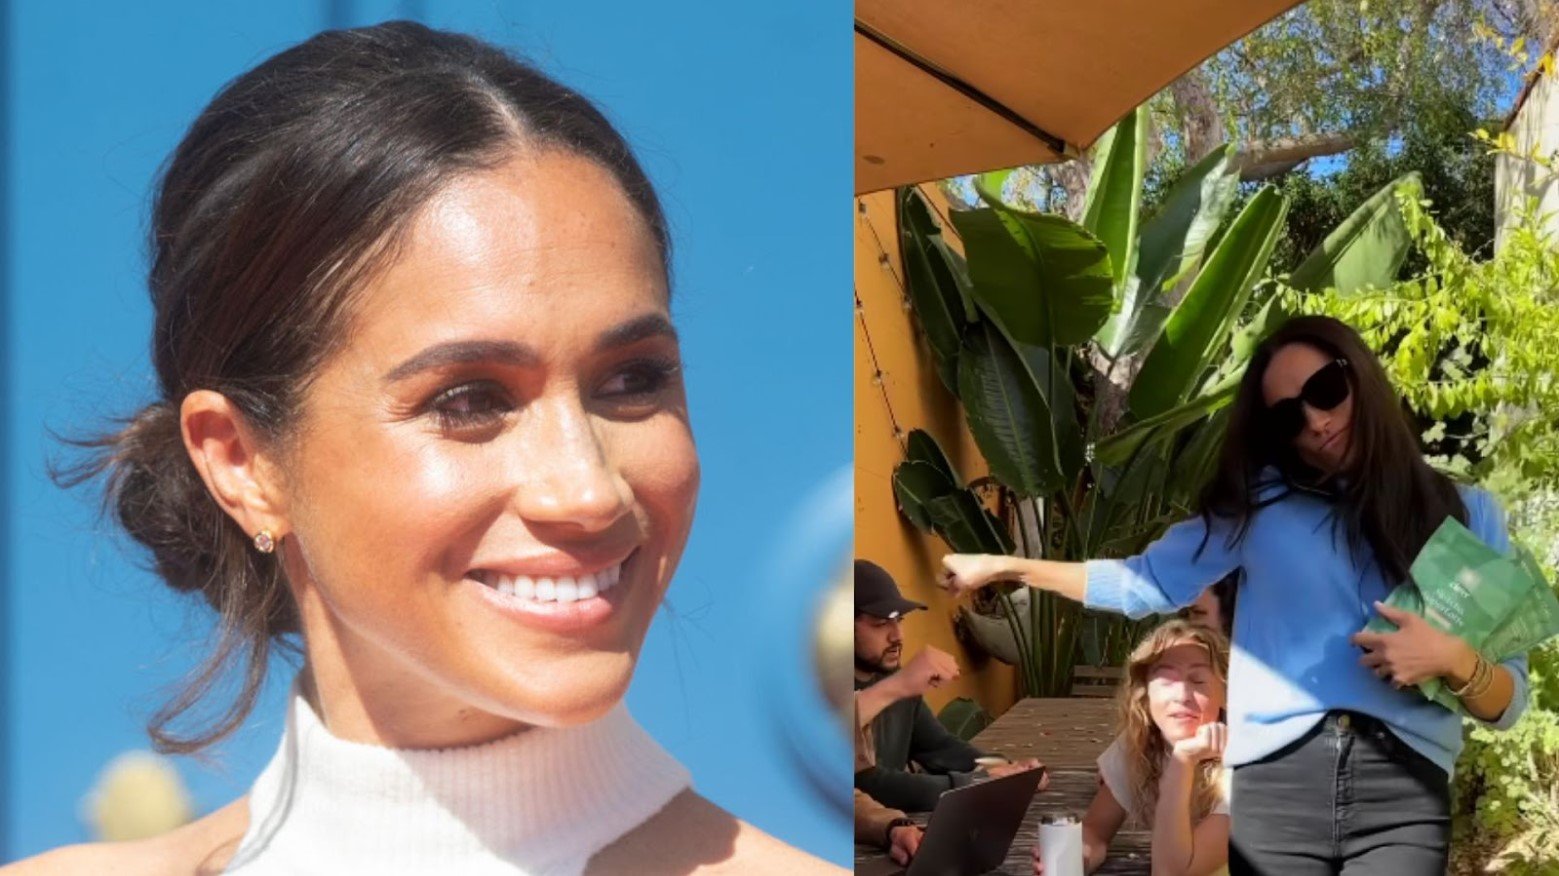 Megan Markle smiling at event/Megan Markle makes an appearance in an Instagram video